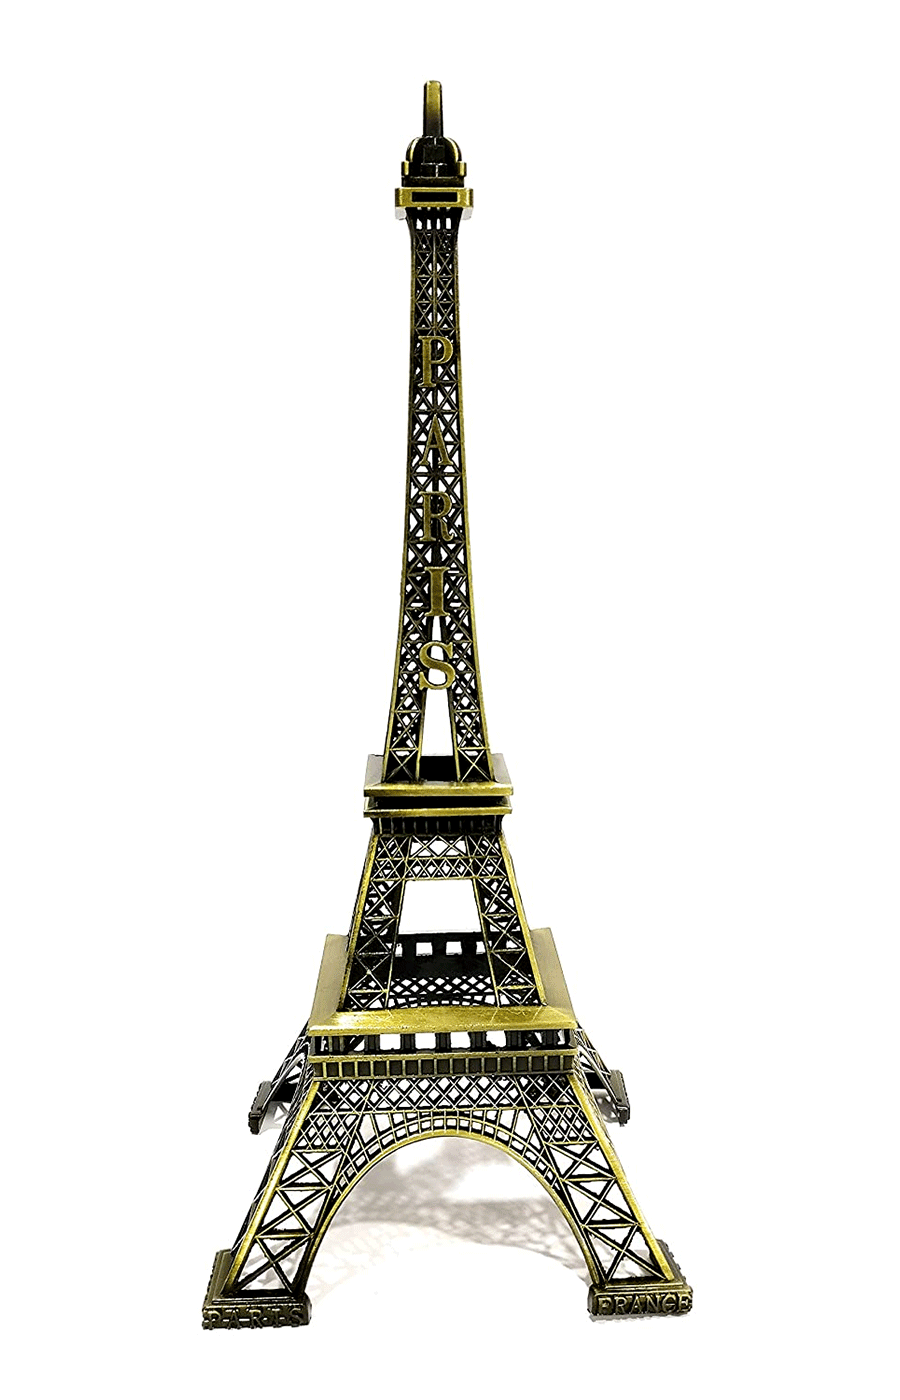 FunkyTradition 16 cm Tall Eiffel Tower Statue Metal Showpiece | Birthday and Home Office Decor 6" Tall